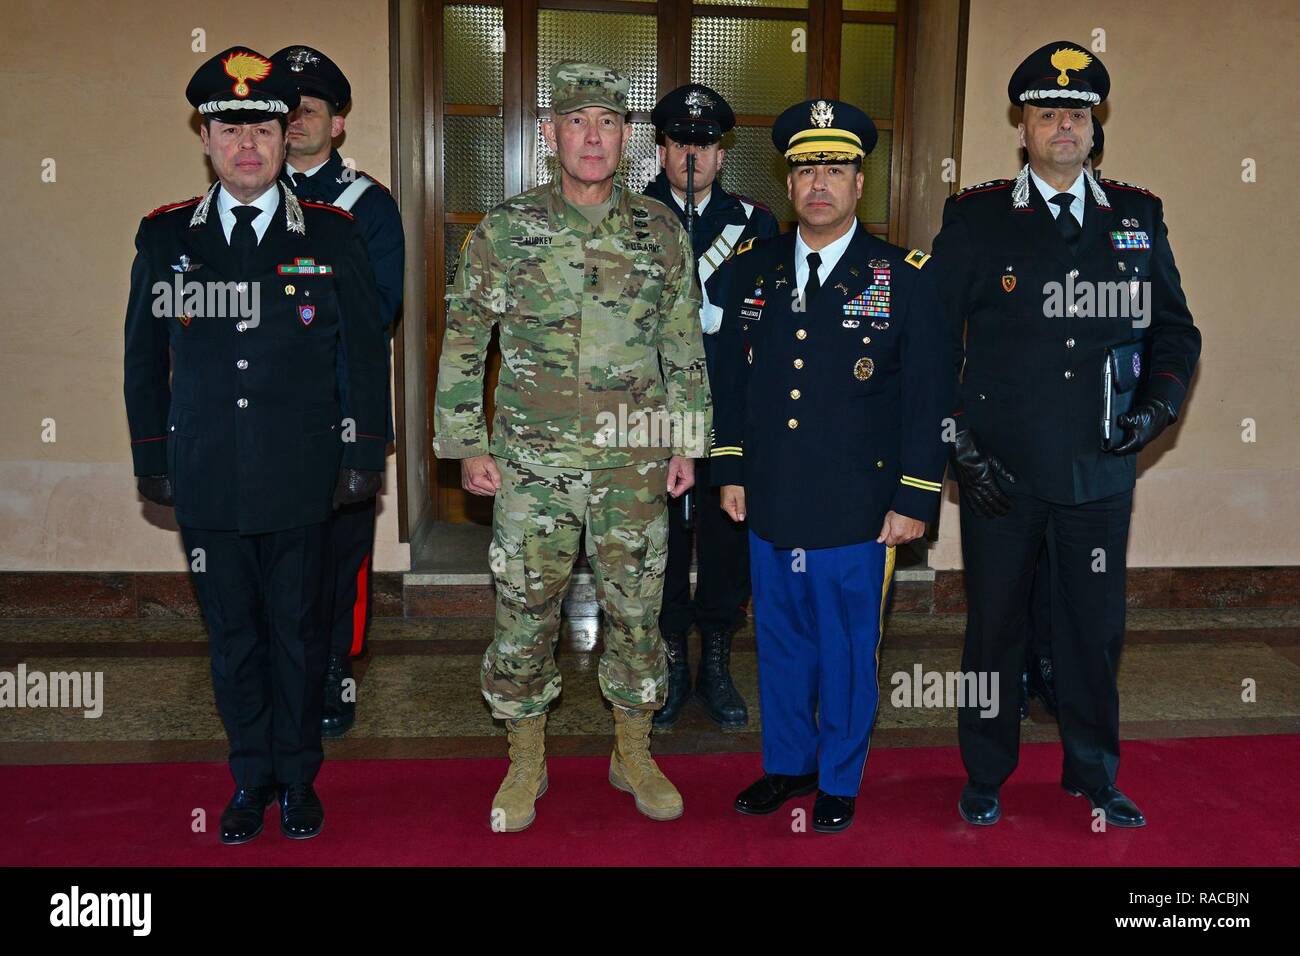 (From left), Col. Roberto Campana, chief of staff Center of Excellence for Stability Police Units (CoESPU), Lt. Gen. Charles D. Luckey, Commanding General U.S. Army Reserve Command, U.S. Army Col. Darius S. Gallegos, CoESPU deputy director and Col Nicola Mangialavori, Chief of Special Branch Department, pose for a group photo at Center of Excellence for Stability Police Units (CoESPU) Vicenza, Italy, January 20, 2017. Stock Photo